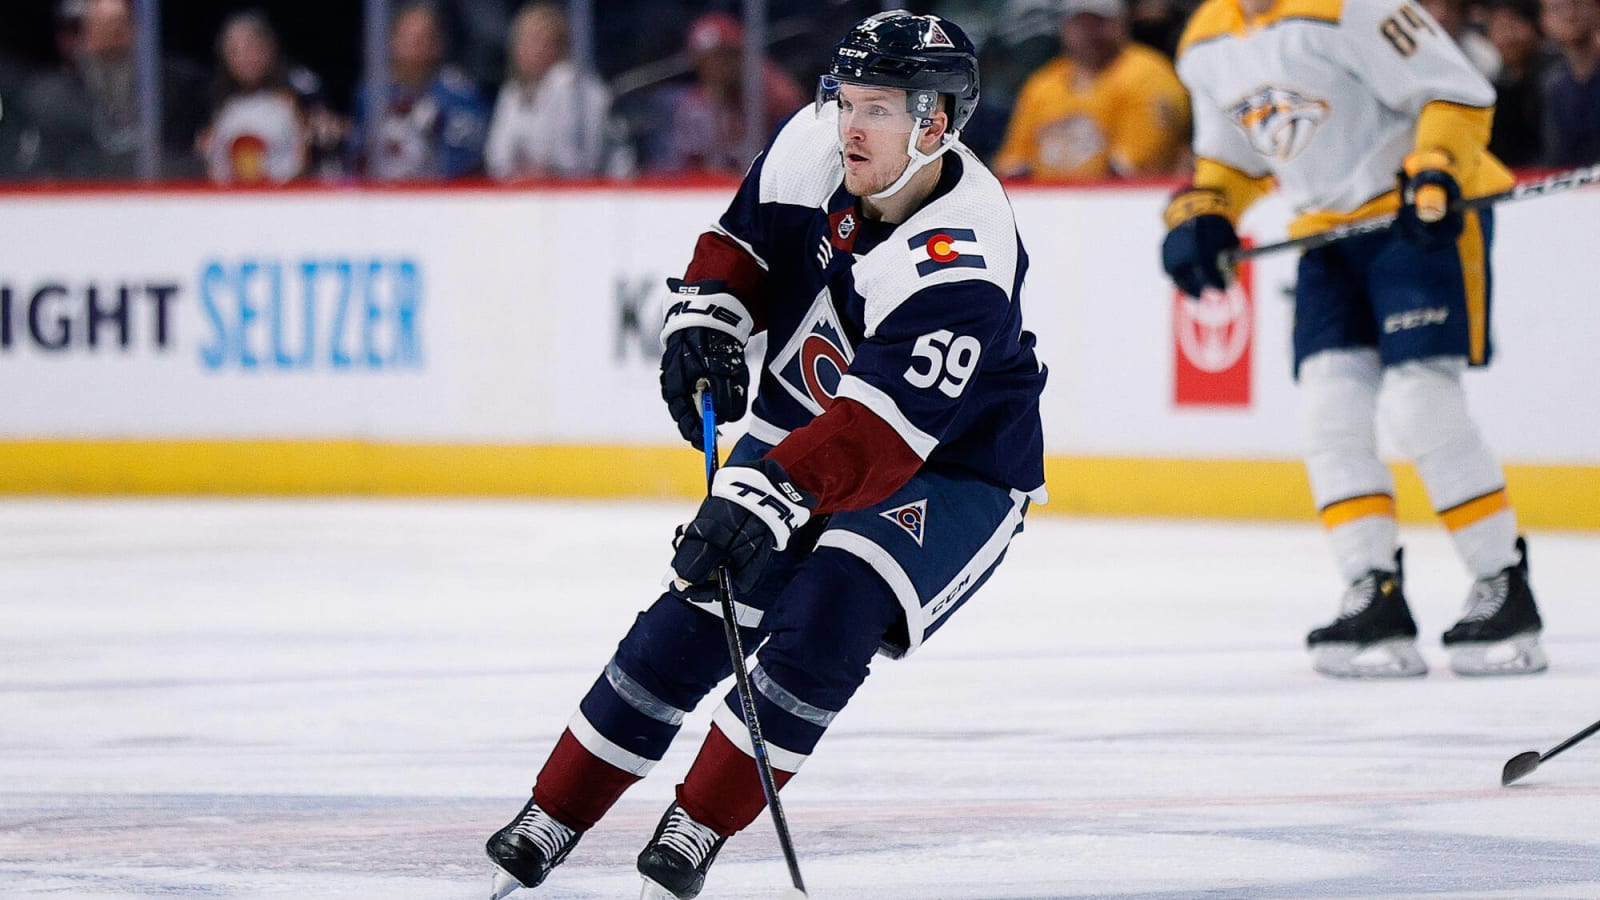 Success in AHL Earned Ben Meyers Another Shot With Avalanche